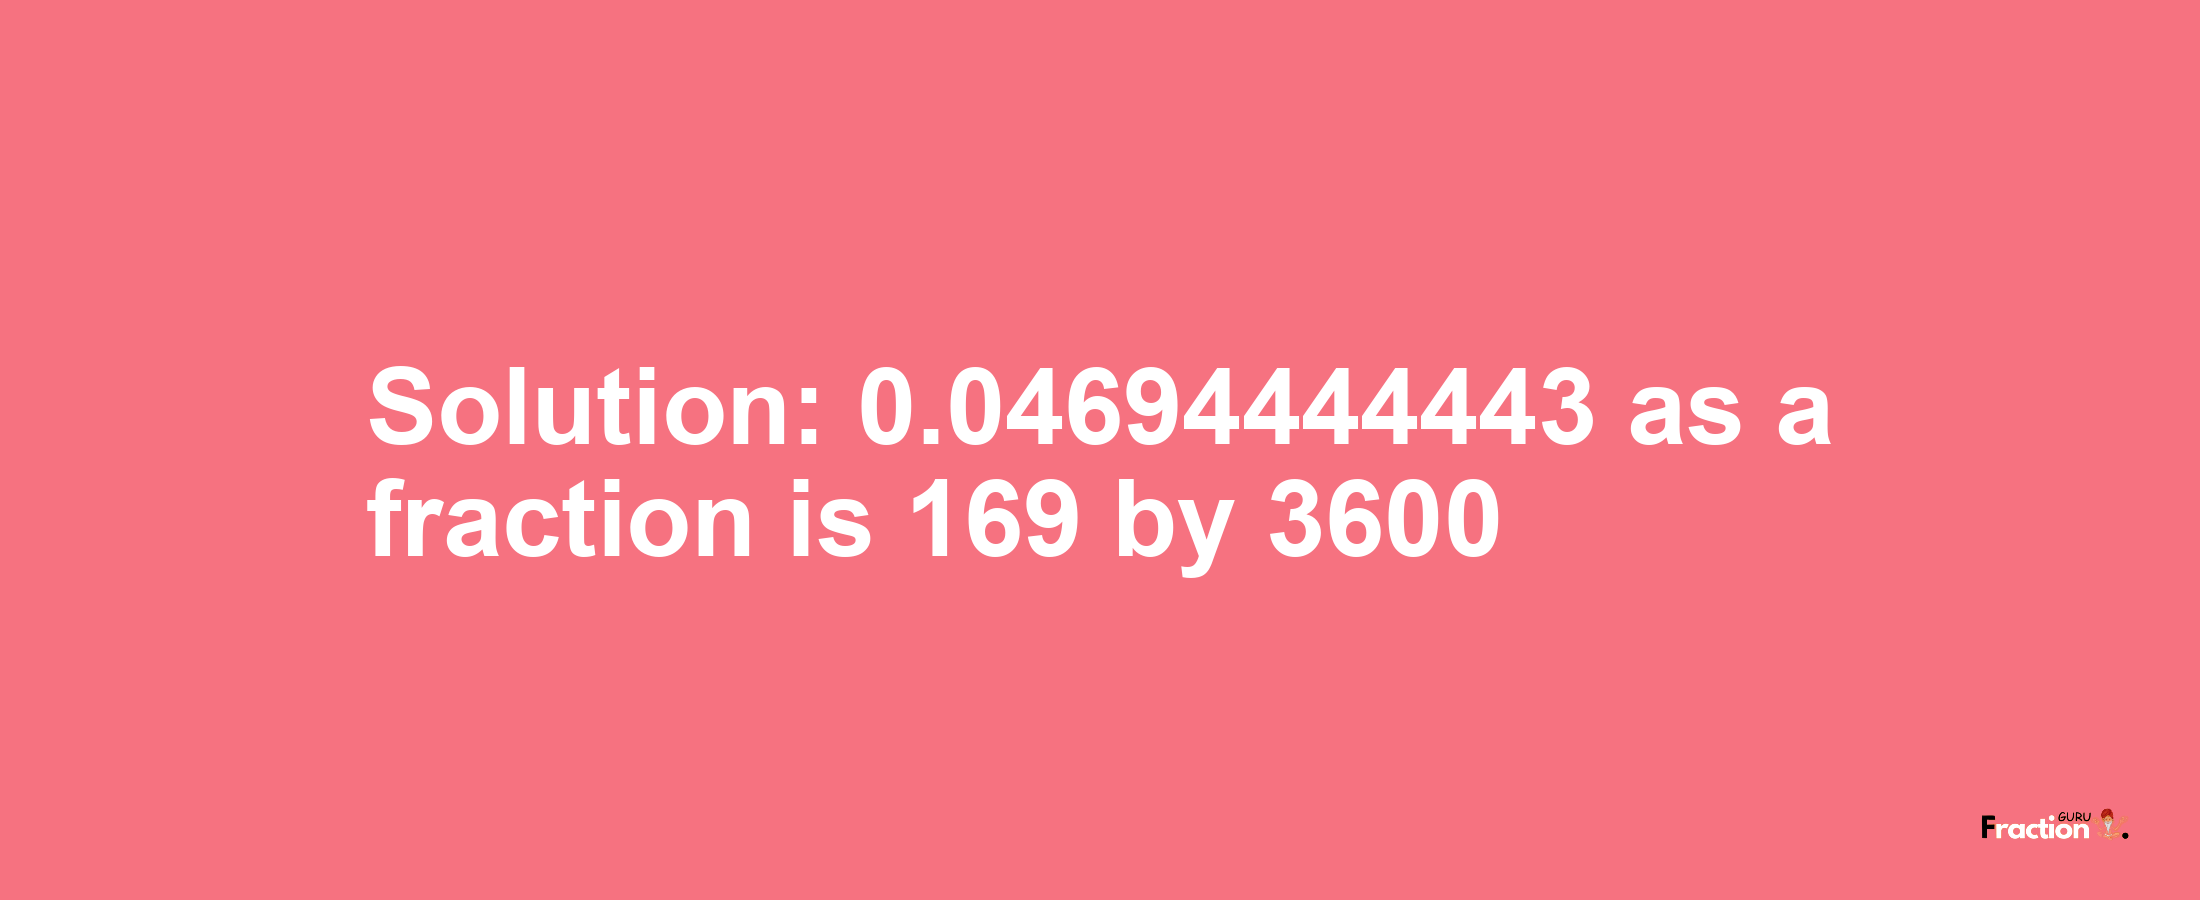 Solution:0.04694444443 as a fraction is 169/3600